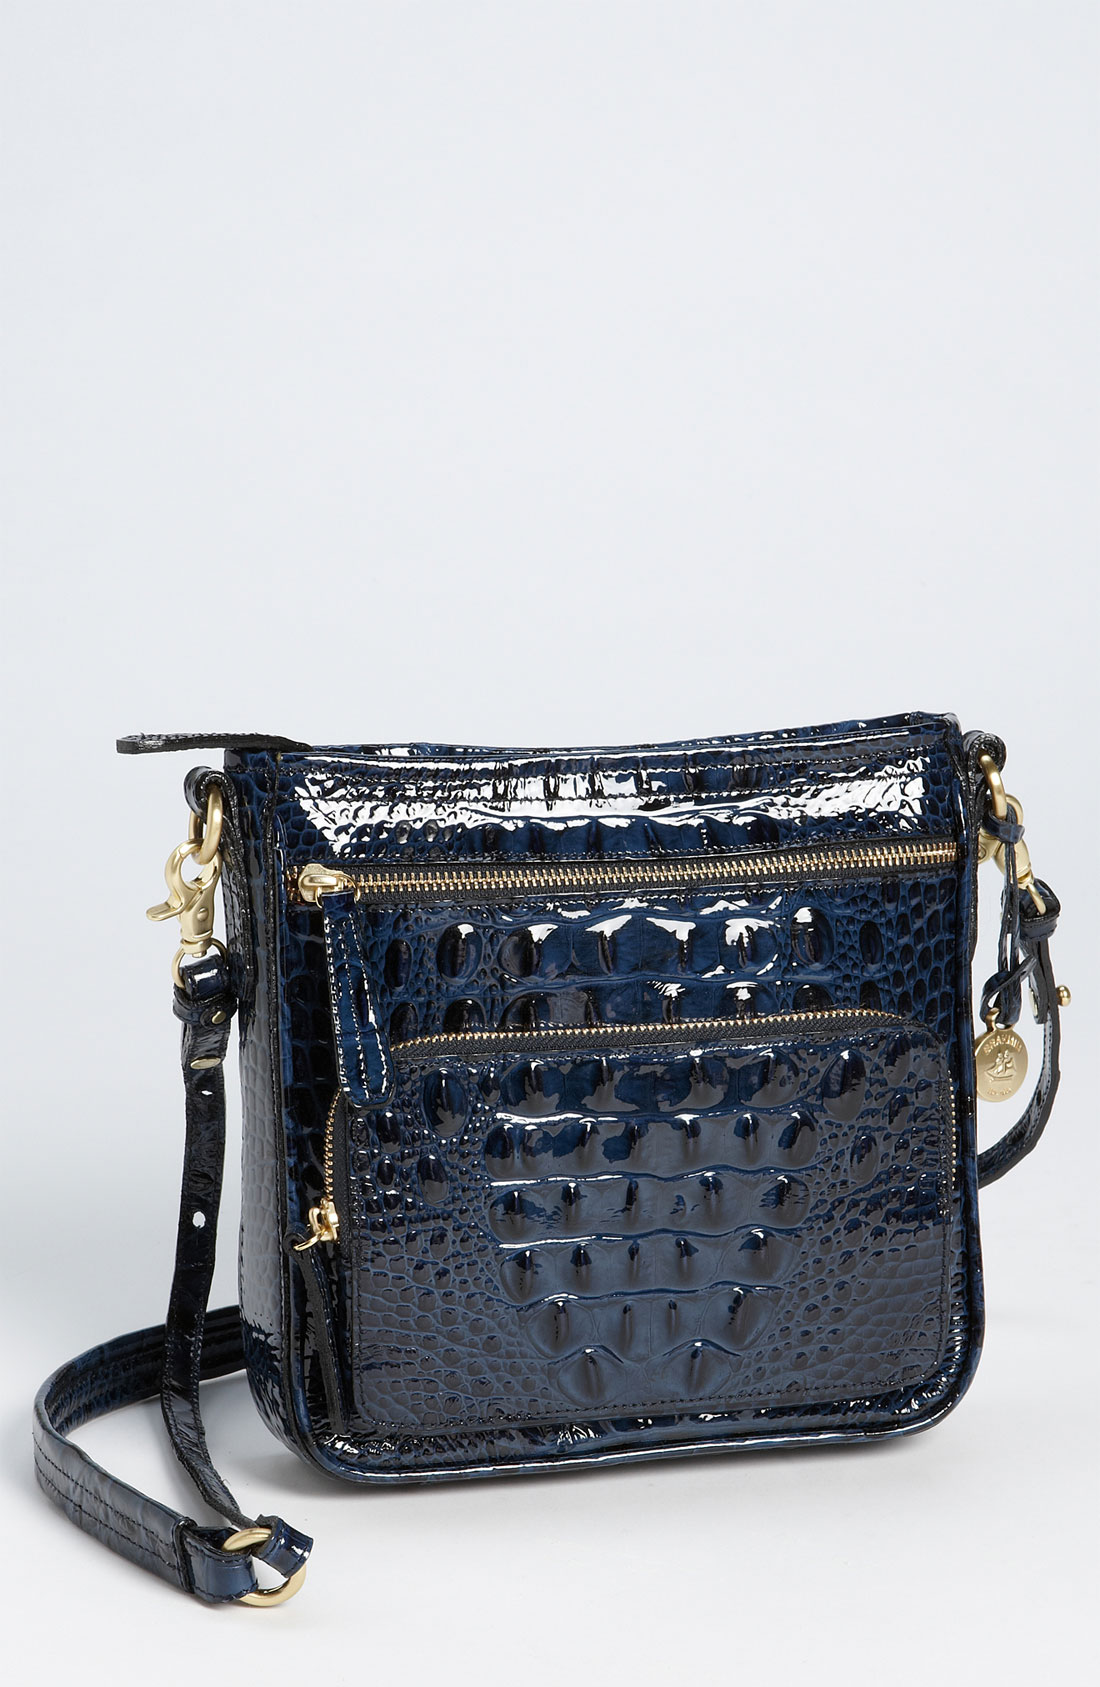 Brahmin Cleo Lacquer Crossbody Bag in Blue (lacquer navy) | Lyst